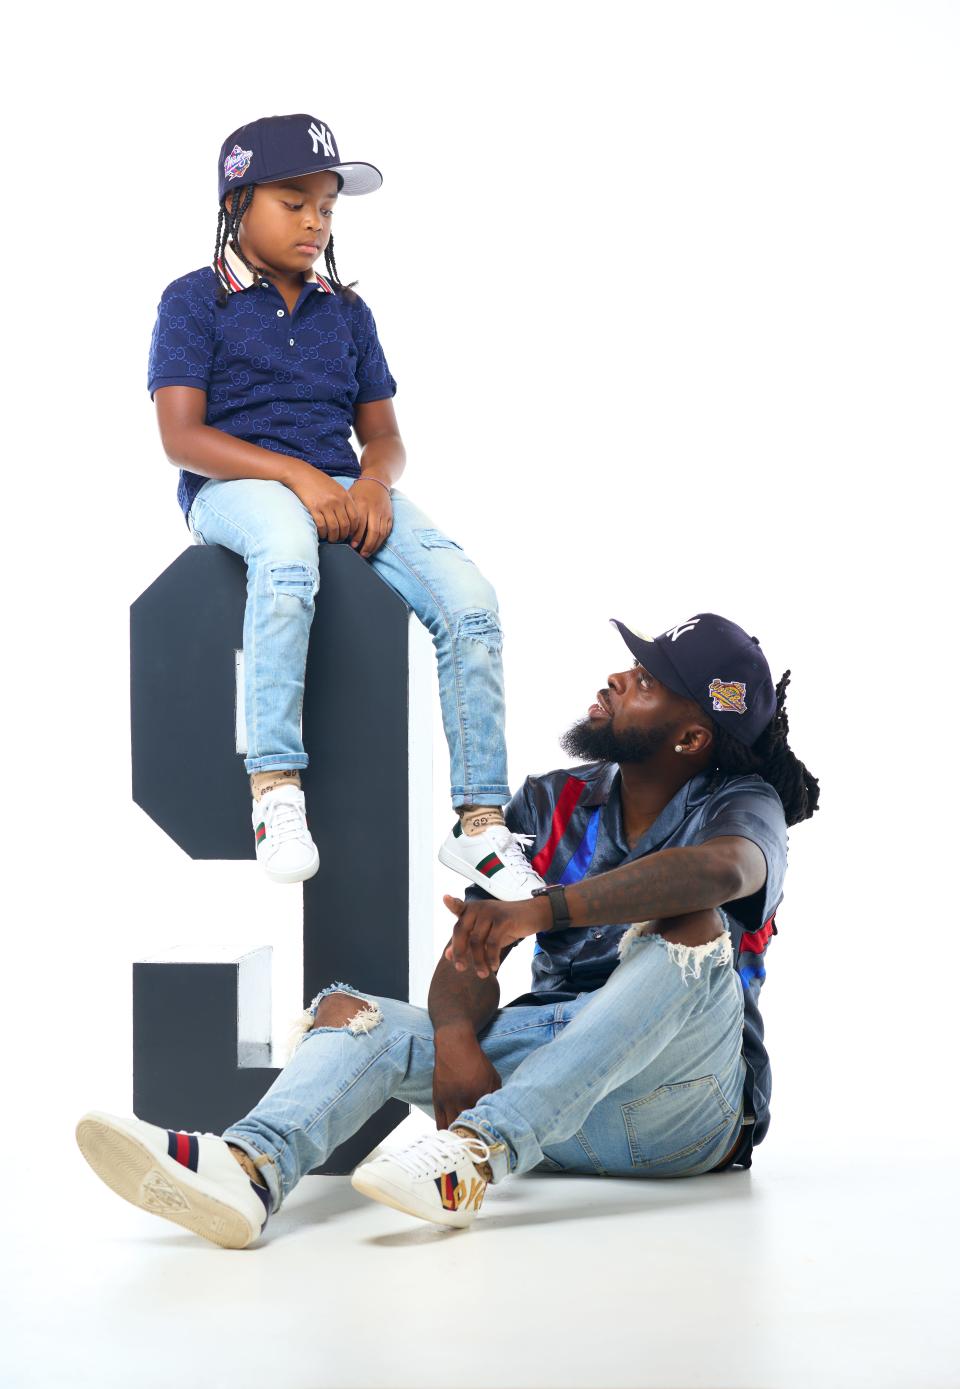 Kevin Augustin a self-taught photographer and his biggest muse, his son Kyro Augustin during his ninth birthday shoot.